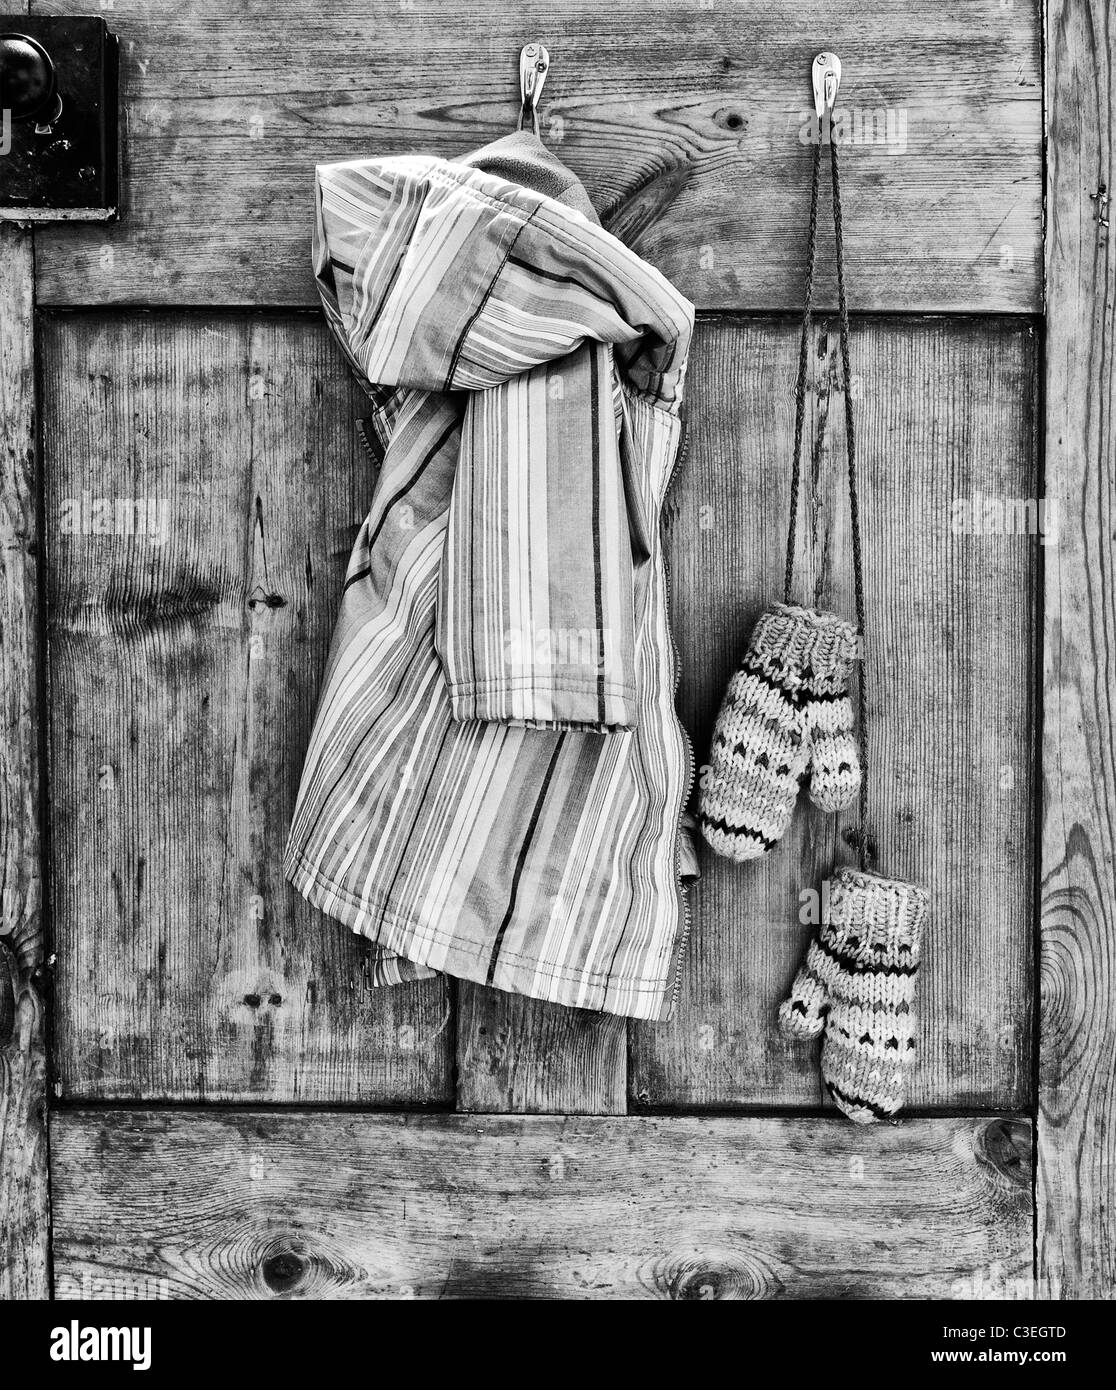 Young Girls striped coat and mittens hanging on a wooden kitchen door. Monochrome Stock Photo